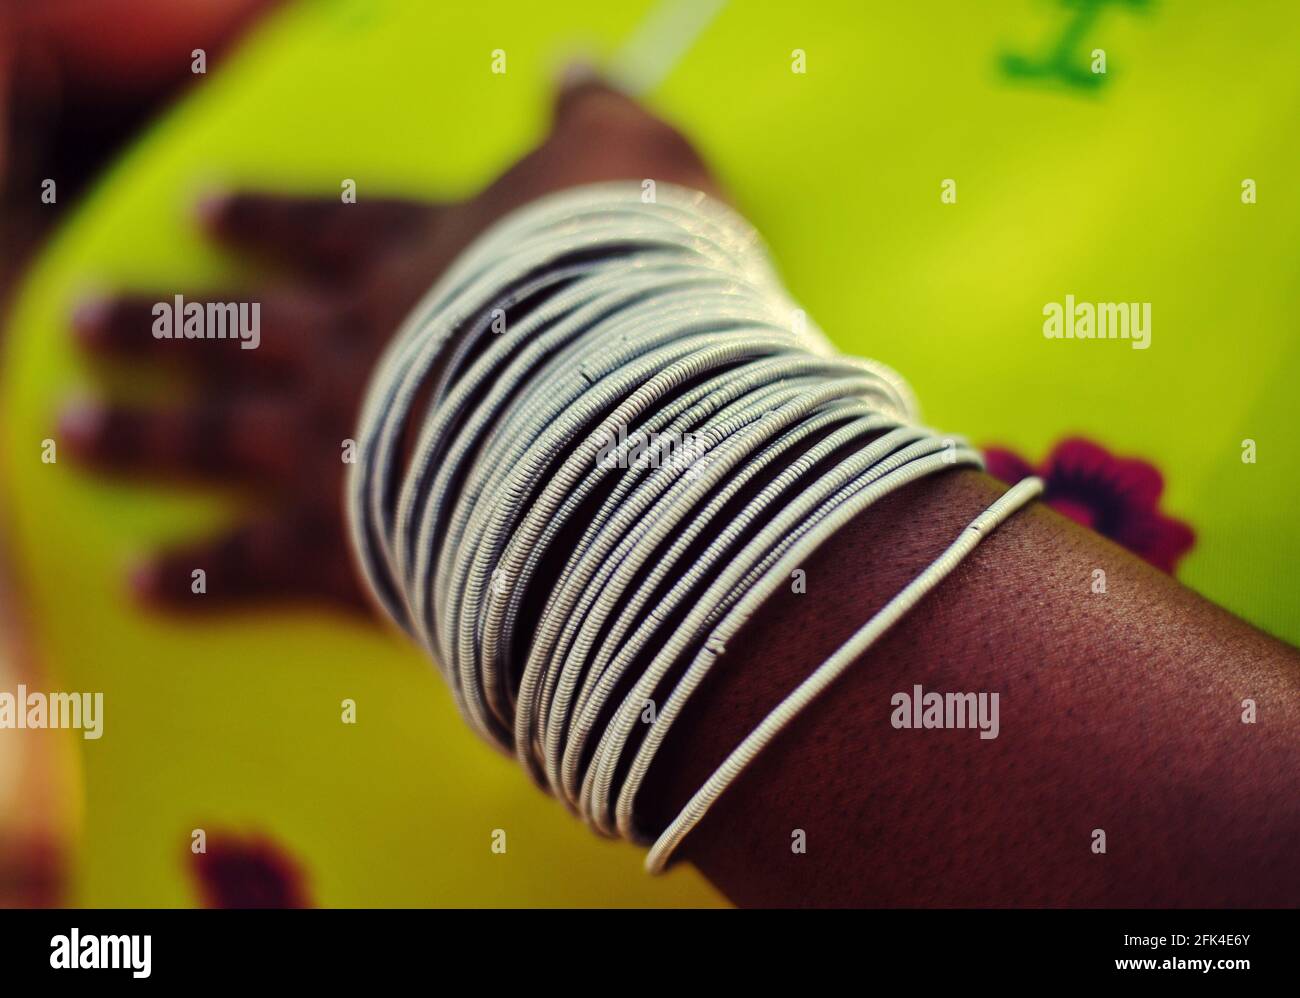 Venda traditional bangles are worn by women as a sign of celebrating beauty  Stock Photo - Alamy